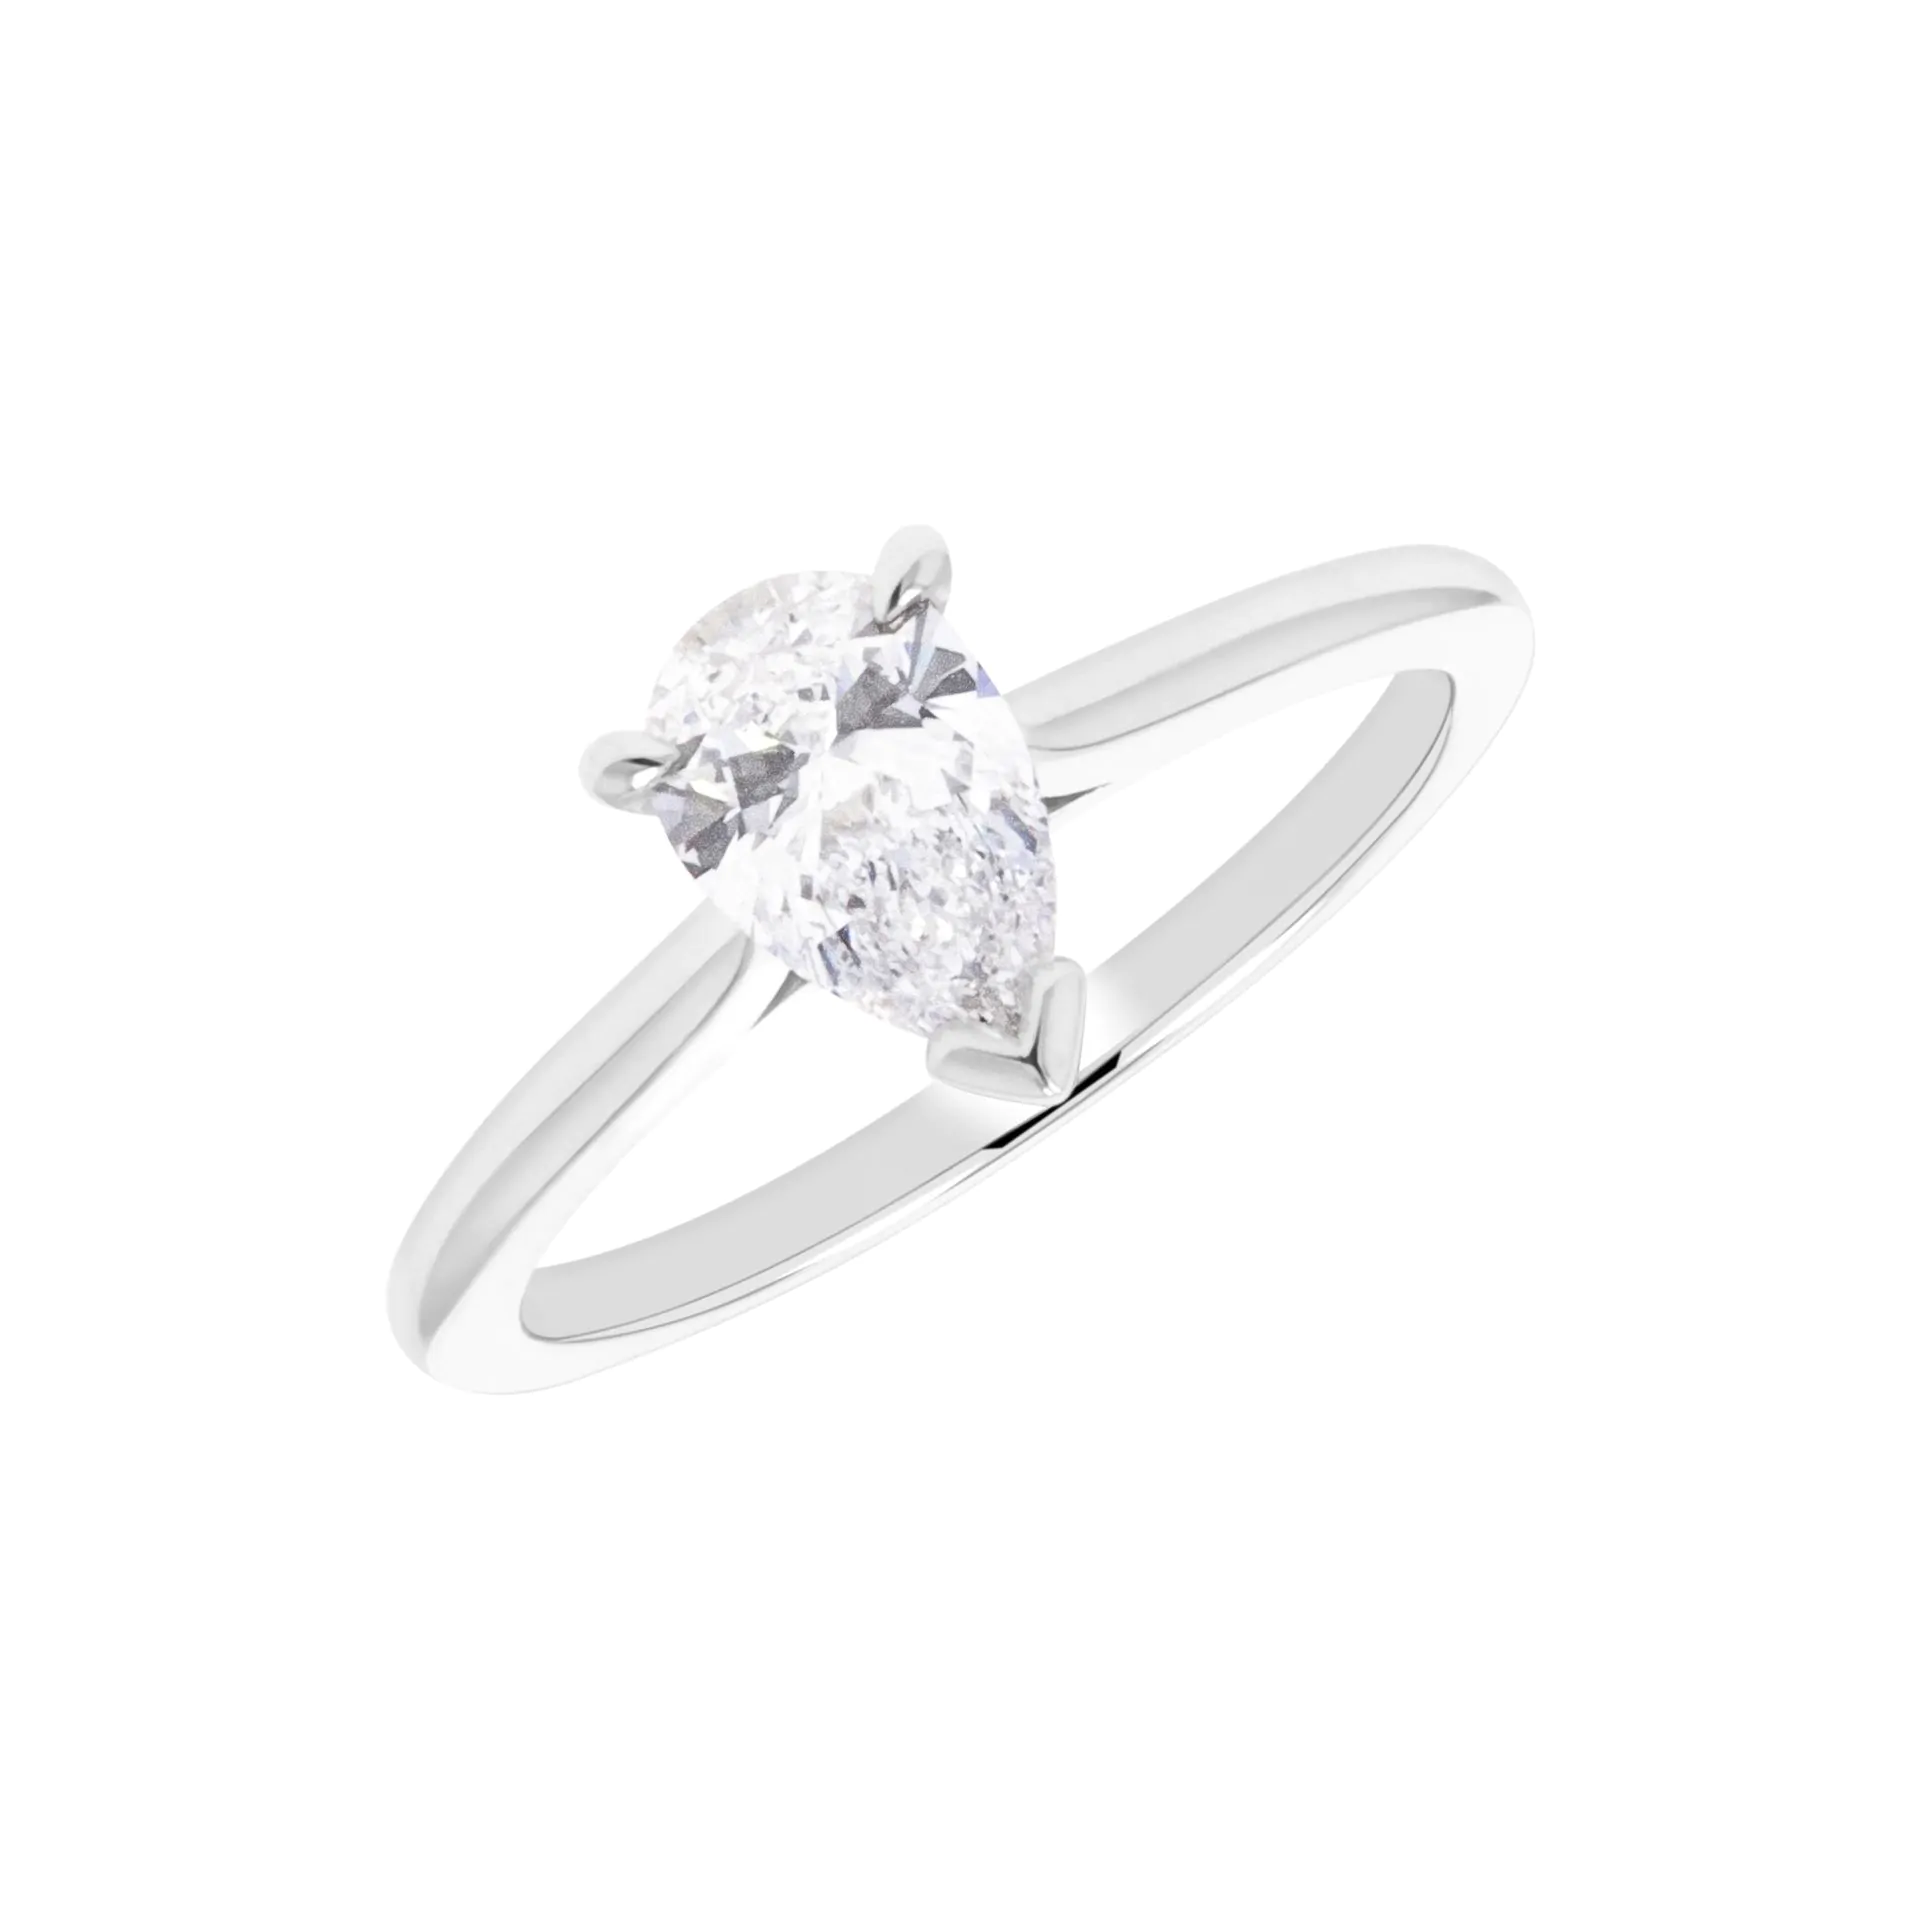 Wendy Platinum 0.70ct Pear Cut Diamond Solitaire Ring